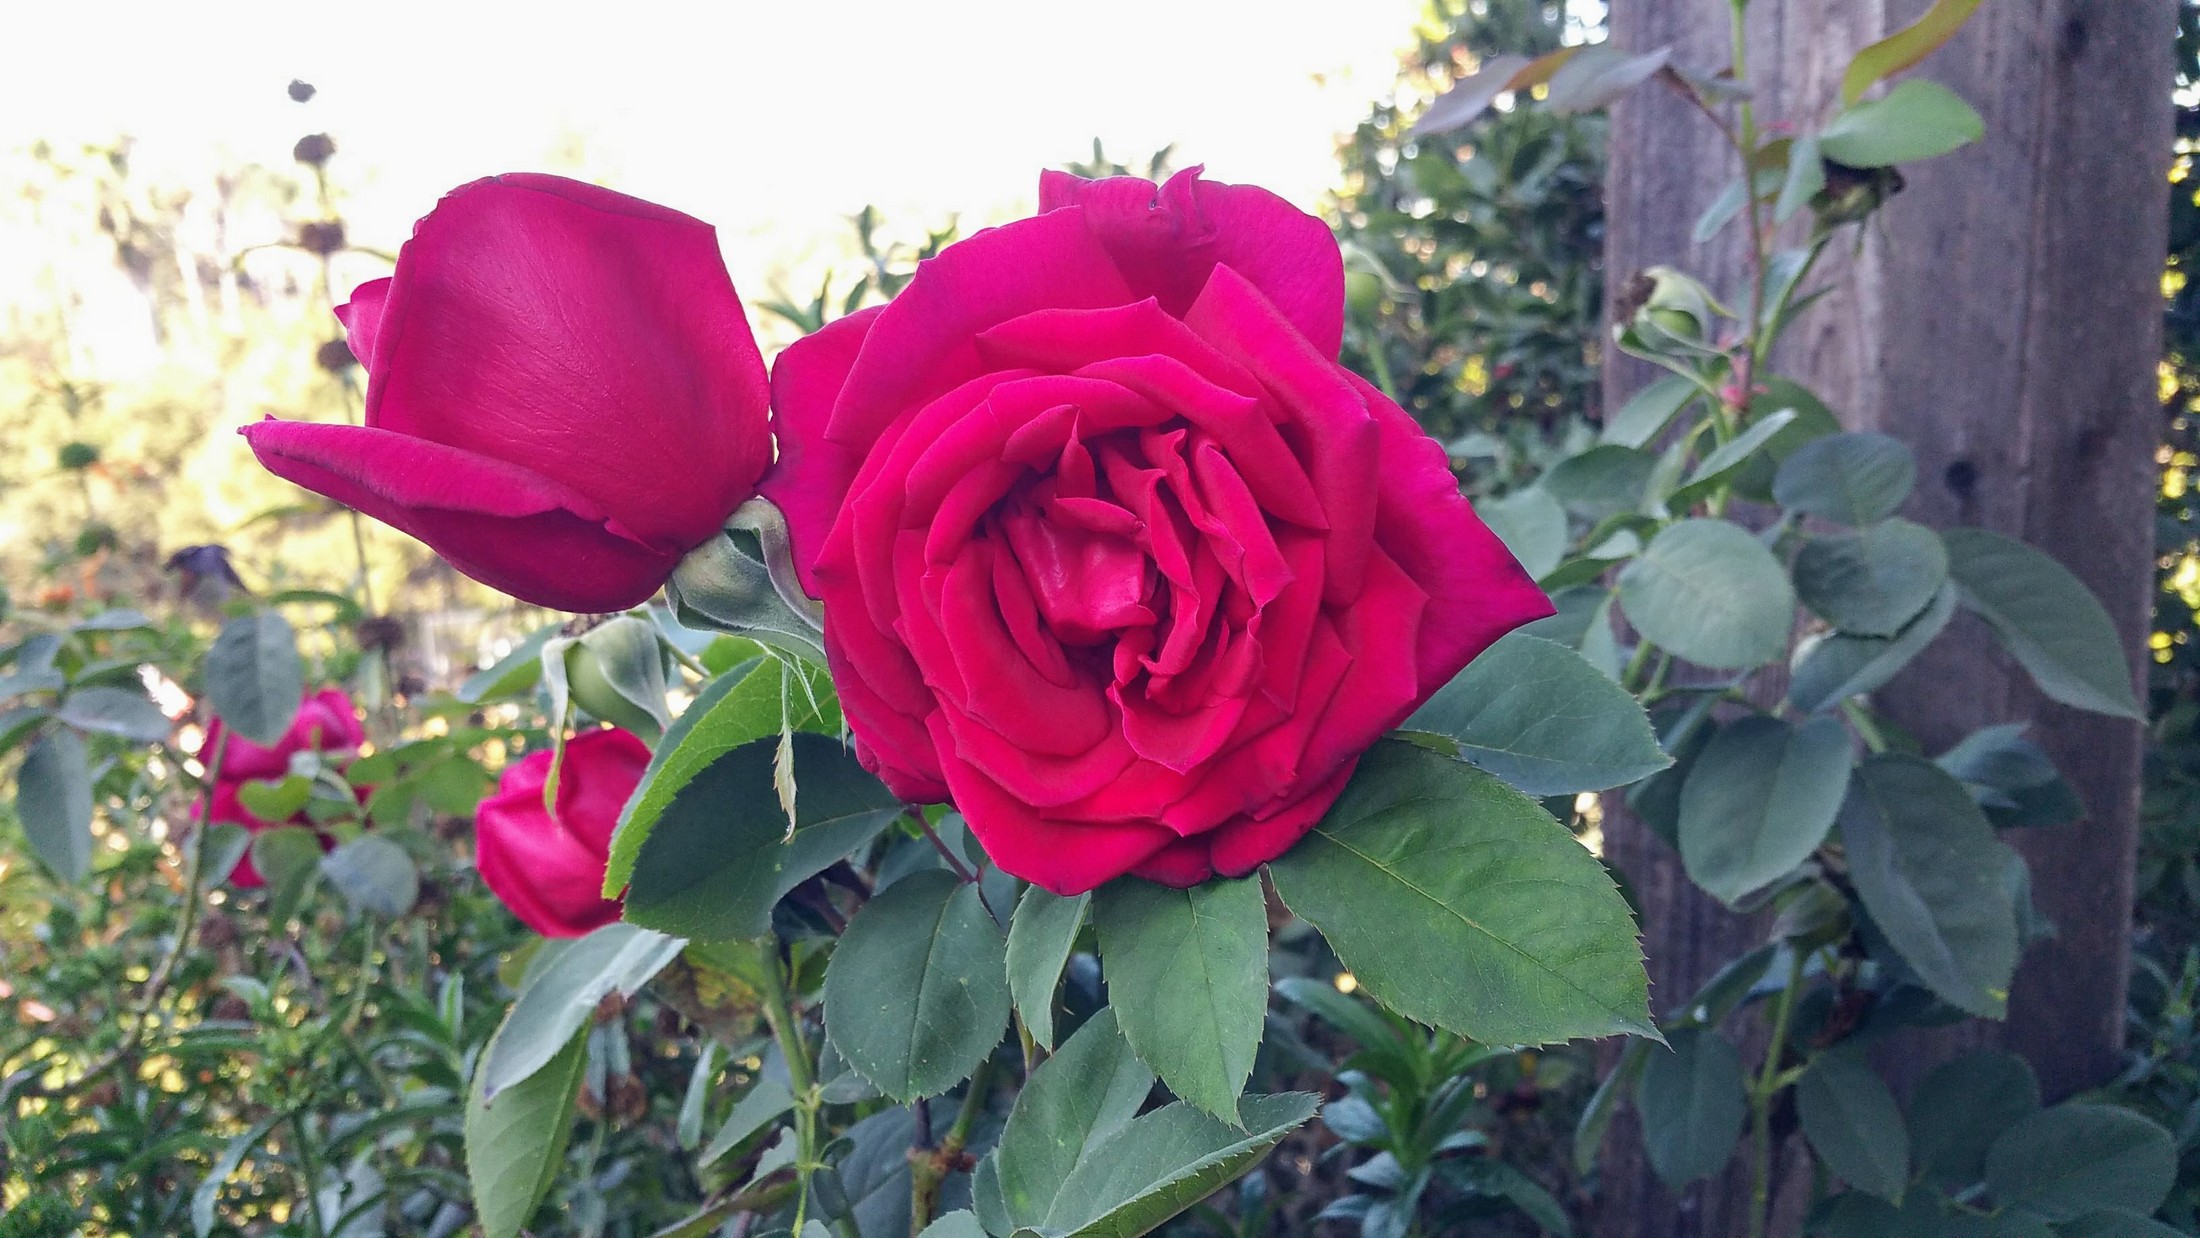 photo of a red rose in the garden